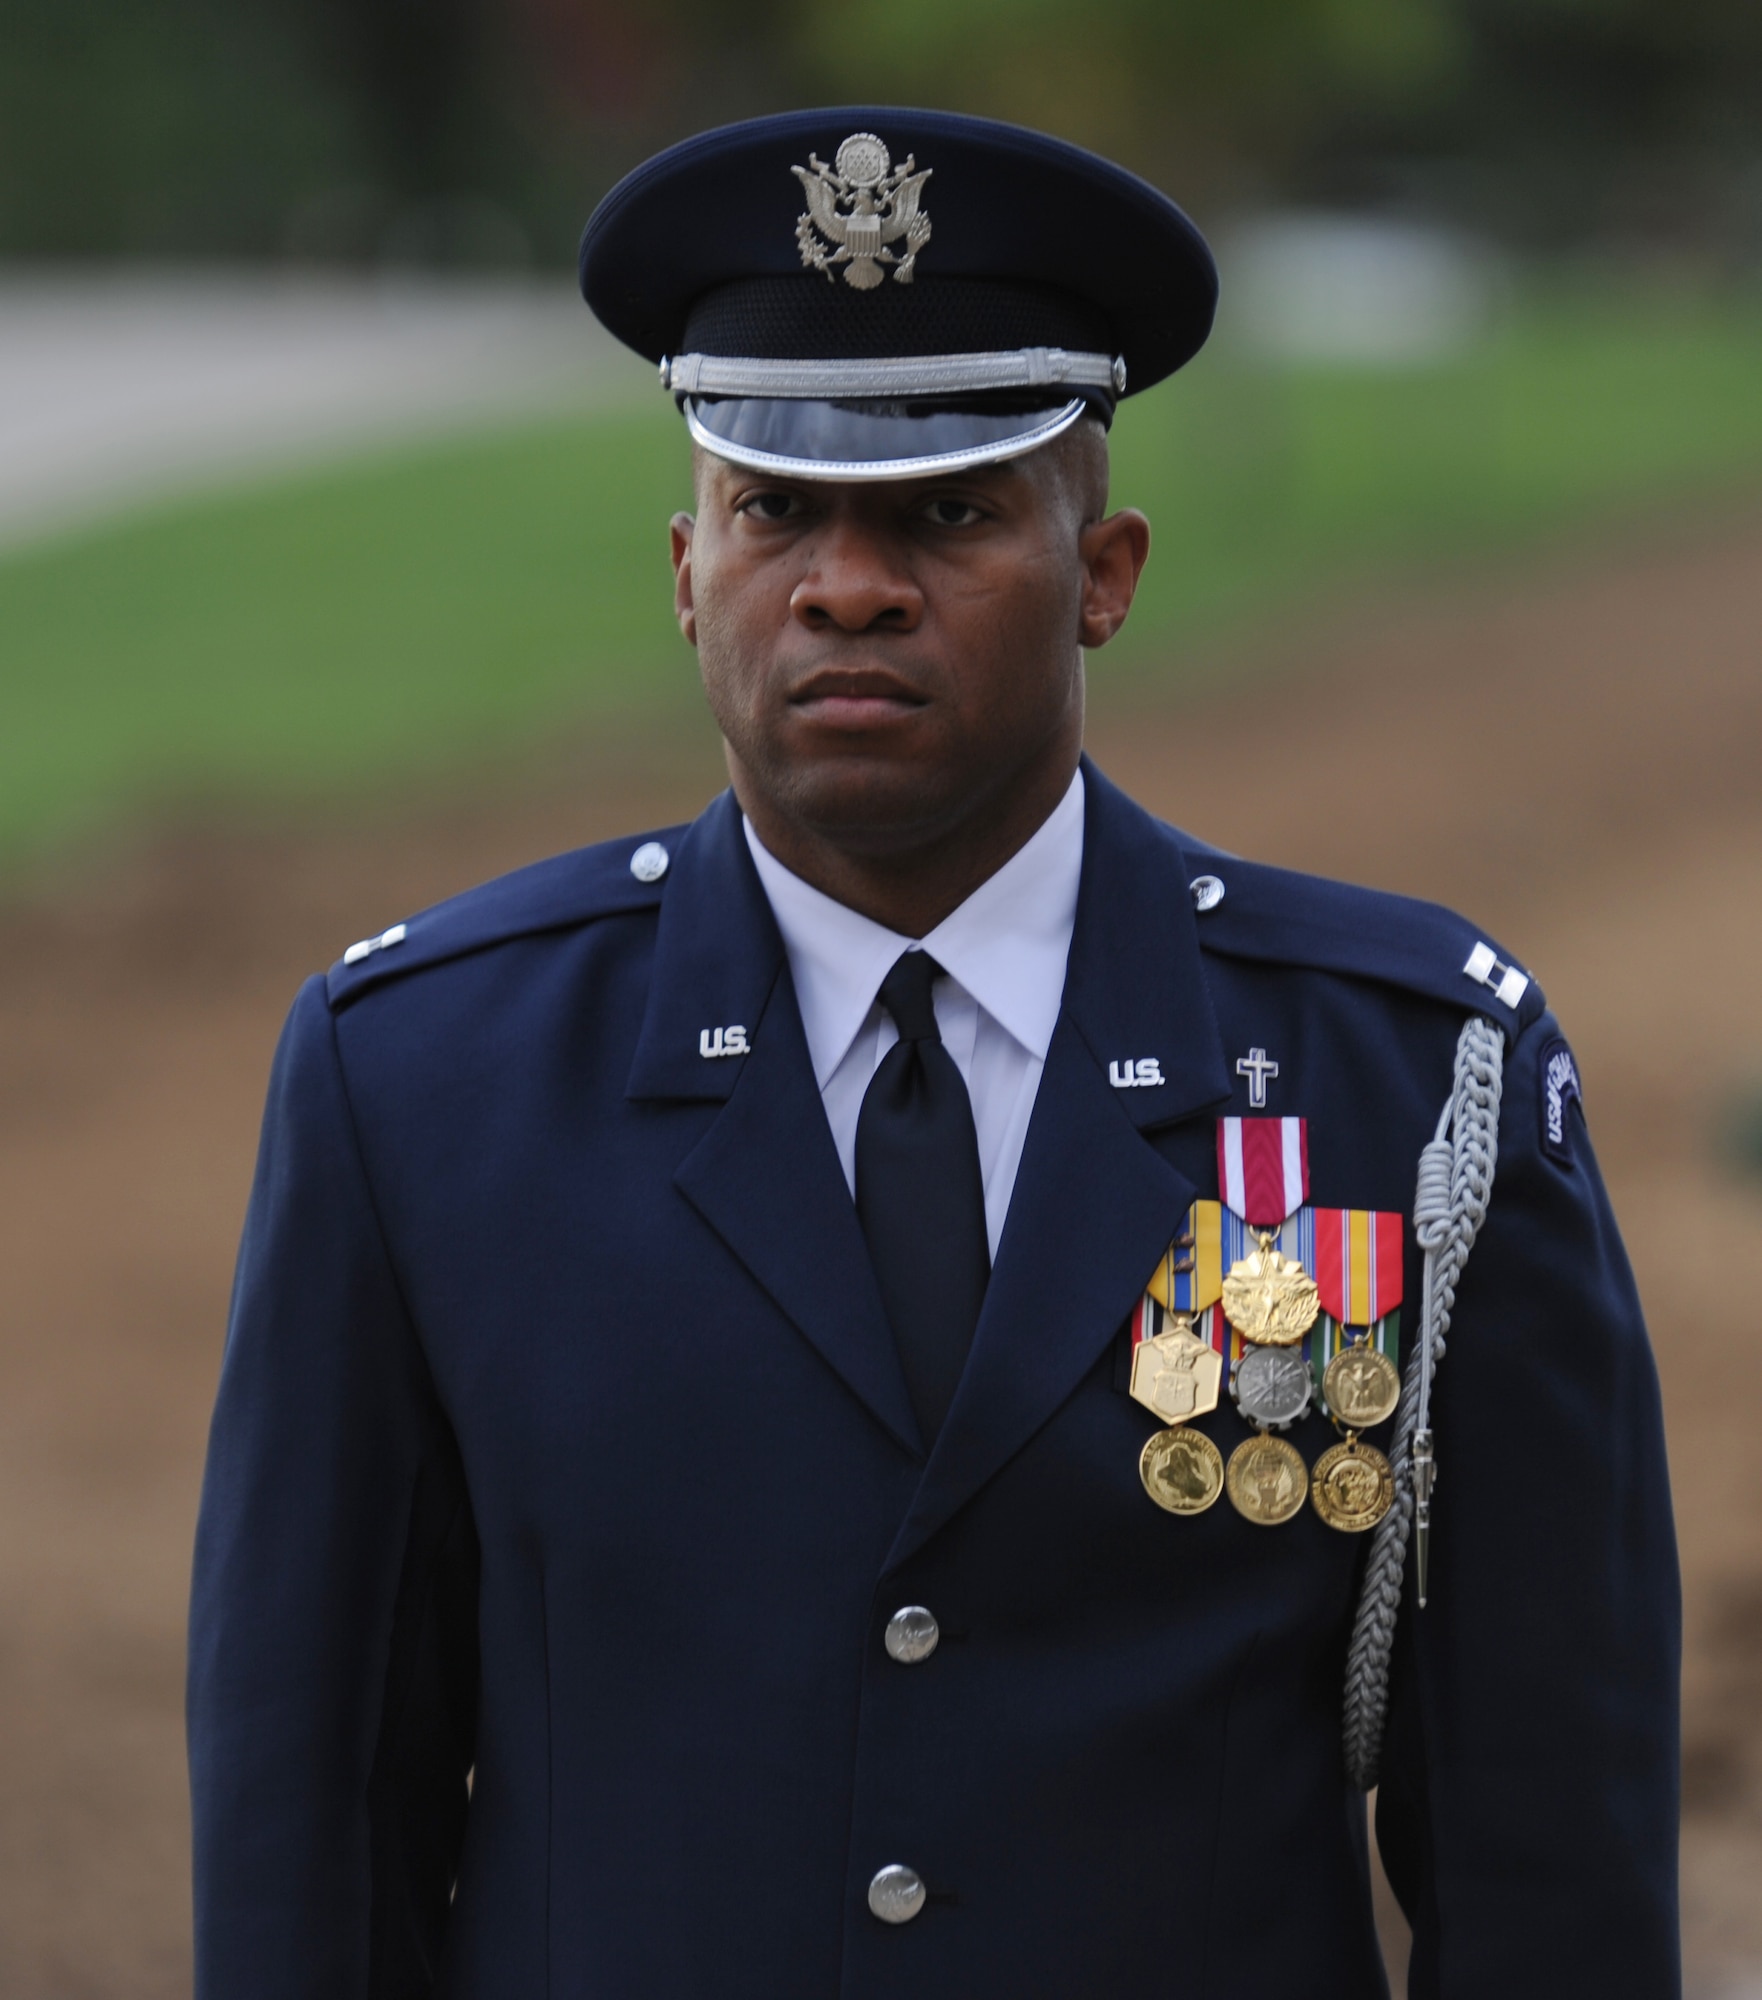 Chaplain (Capt.) Christian L. Williams is one of the chaplains representing the military services responsible for honoring those who are laid to rest at Arlington National Cemetery, Va. Another major role is to comfort and assist the families of those service members buried at the nation's largest national cemetery. (U.S. Air Force photo/Staff Sgt. Christopher M. Ruano)